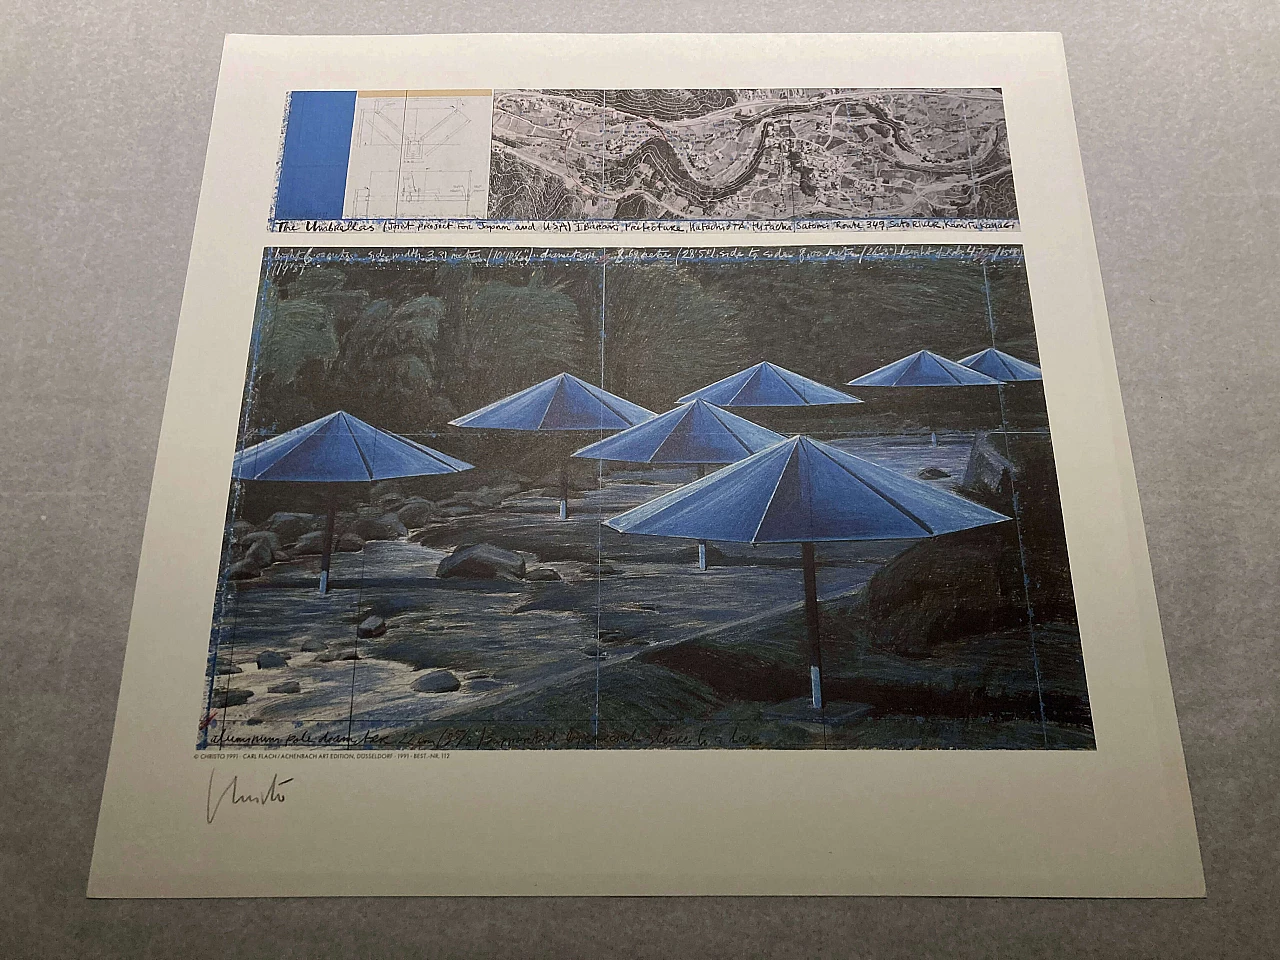 Christo, The Umbrellas - Joint Project for Japan and USA, litografia, 1991 5